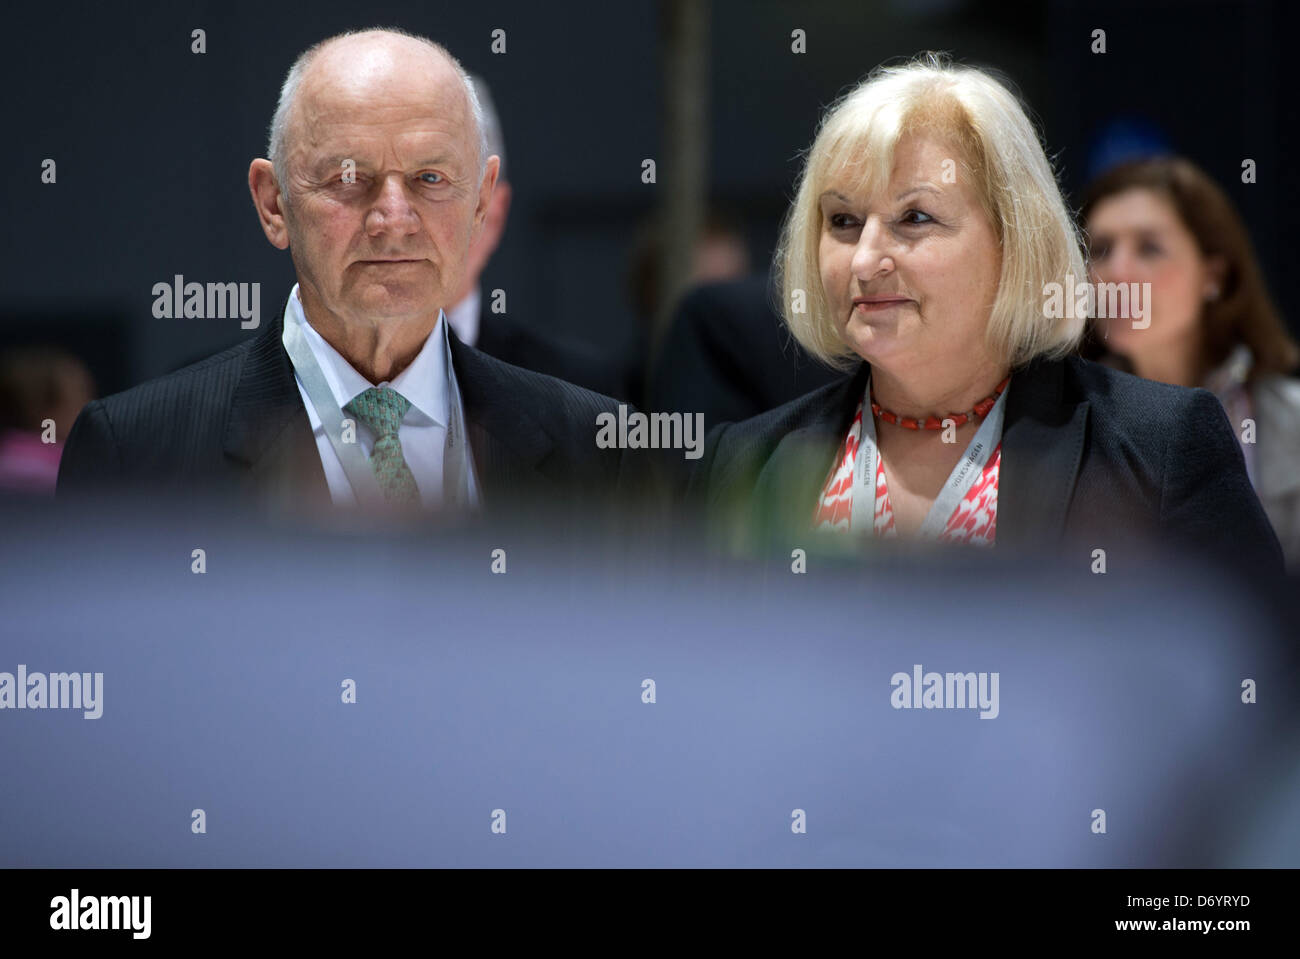 Volkswagen chairman of the supervisory board Ferdinand Piech and his wife and supervisory board member Ursula Piech attend the VW general meeting in Hanover, Germany, 25 April 2013. Photo: JULIAN STRATENSCHULTE Stock Photo